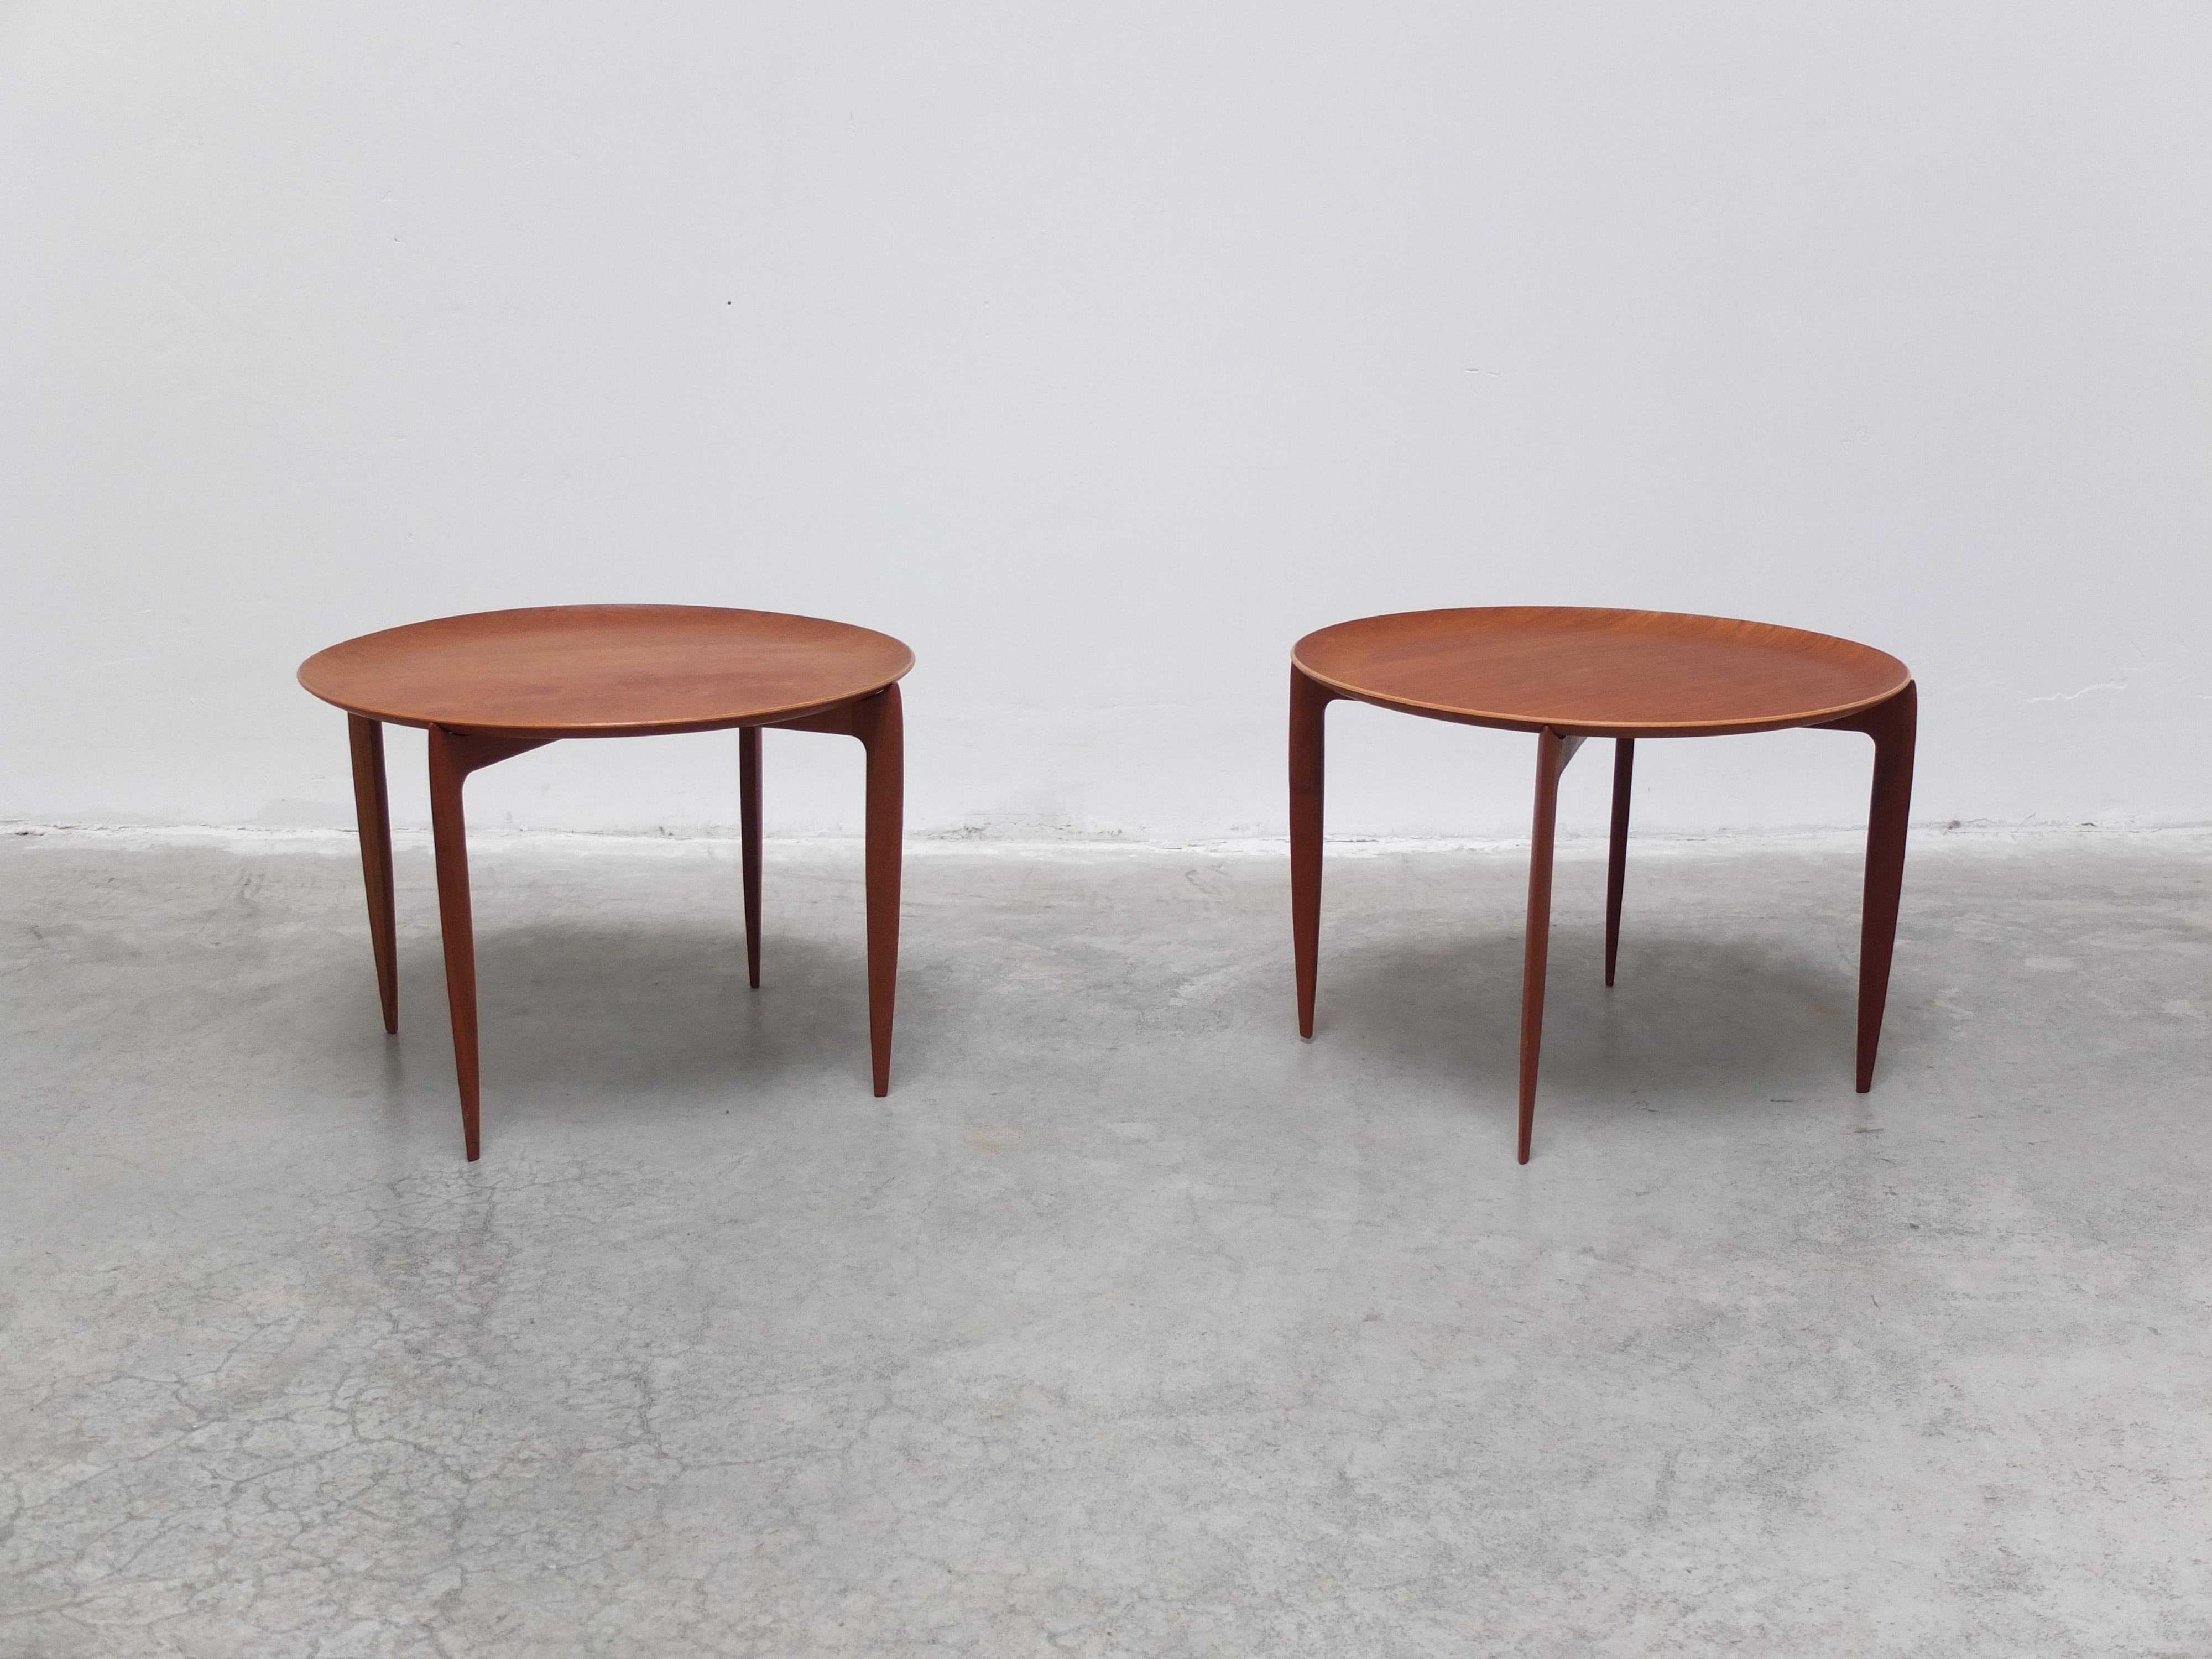 A rare original pair of model ‘4508’ tray tables designed by H. Engholm and Svend Aage Willumsen for Fritz Hansen in 1958. Beautiful early version fully executed in teak and produced in the early 60s. This design is very refined with great details